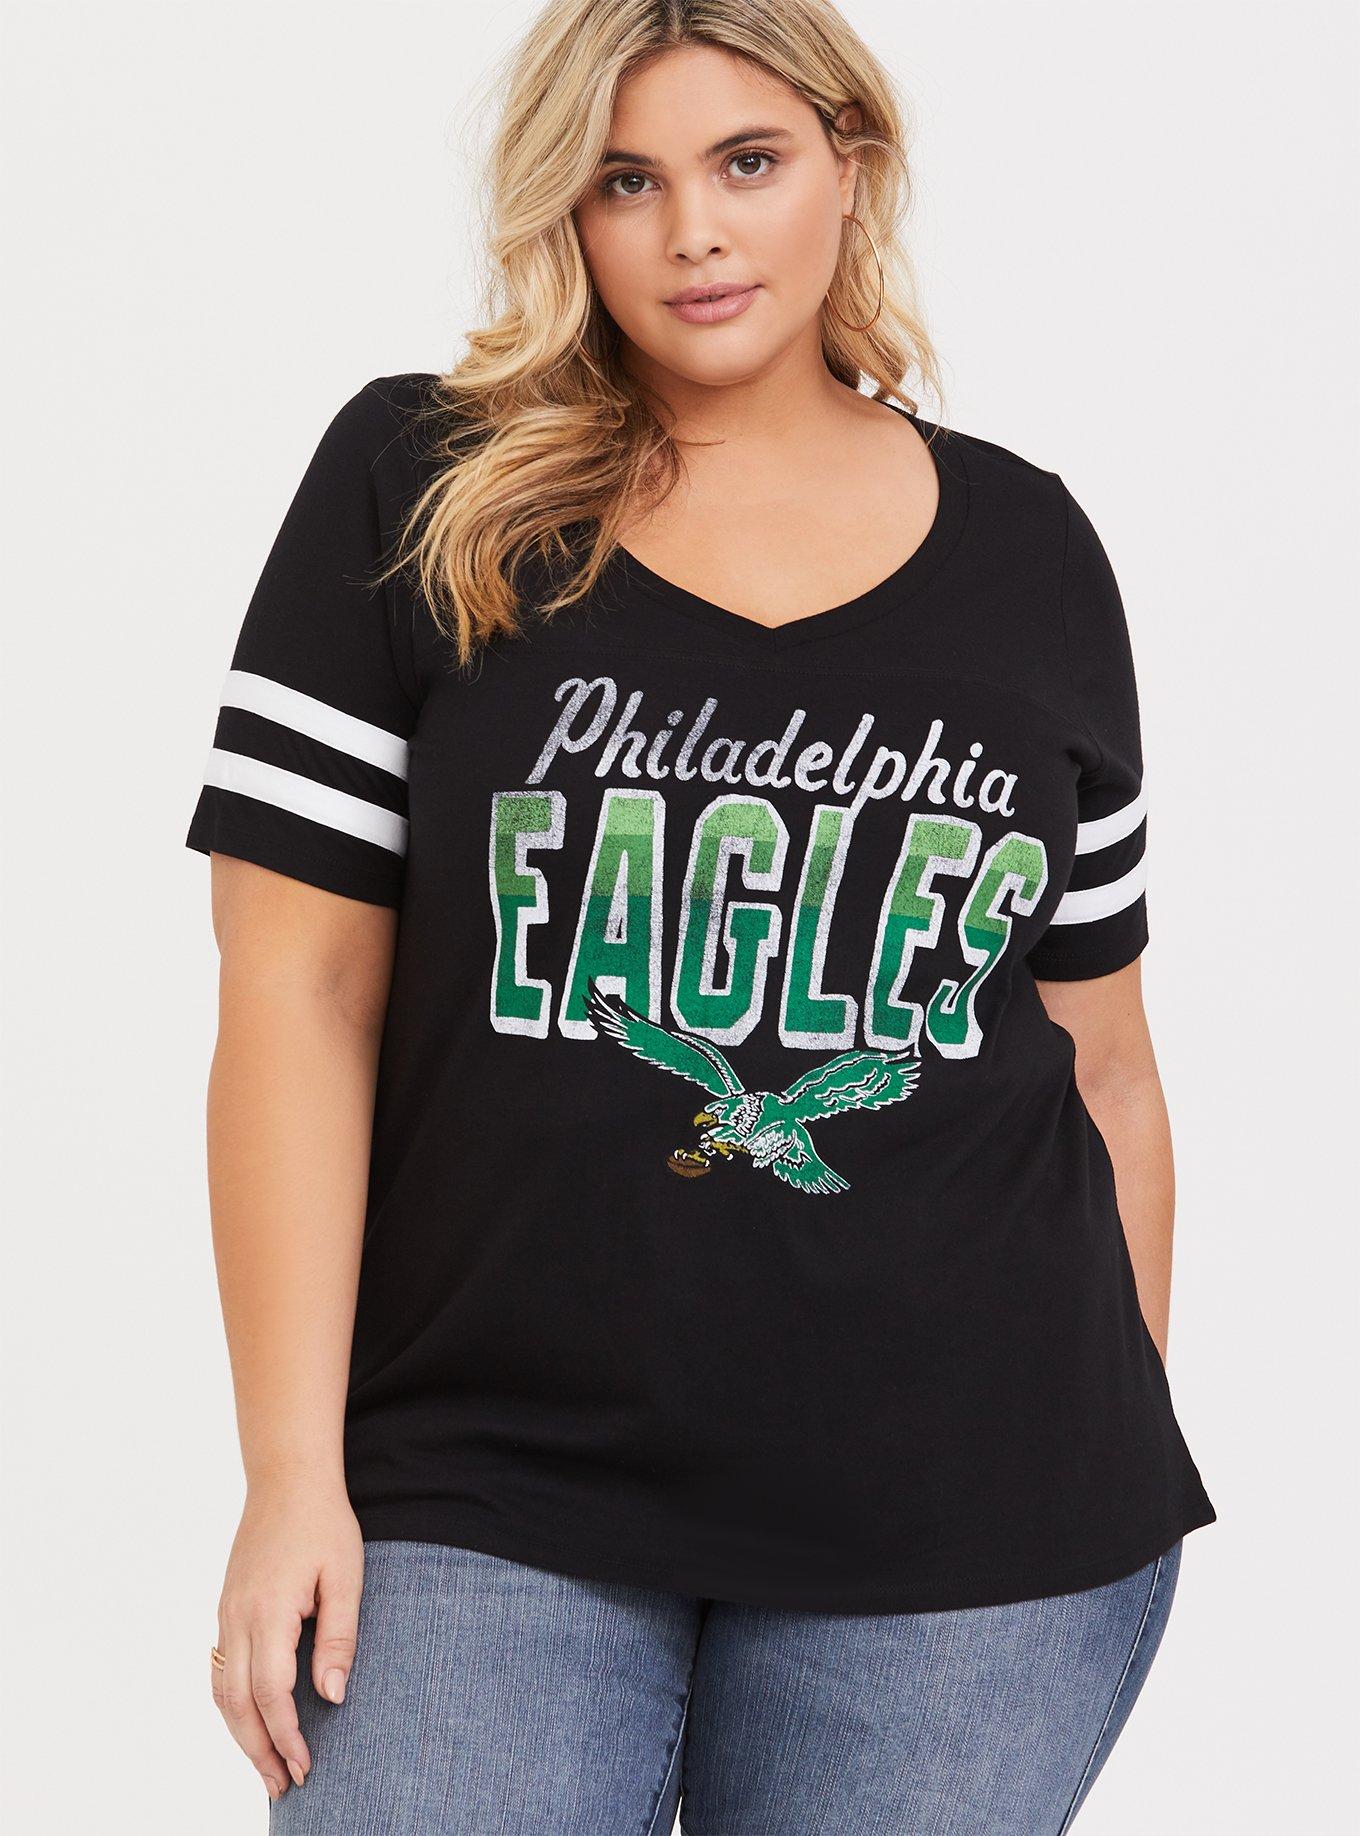 NFL For Her Philadelphia Eagles Pink & Gray Layered T-Shirt Womens Size L